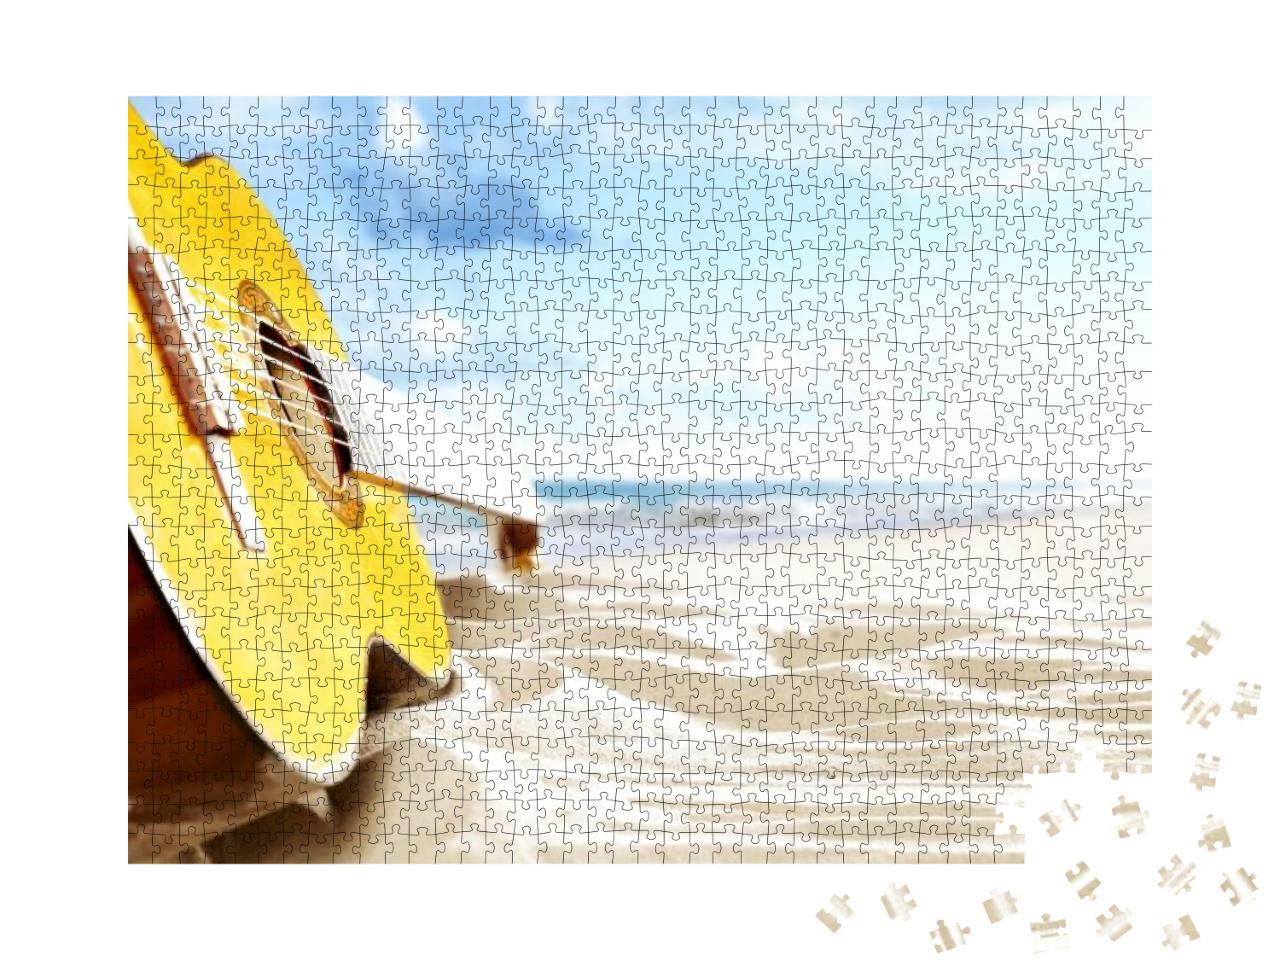 On a Sunny Beach Guitar & Suitcase... Jigsaw Puzzle with 1000 pieces